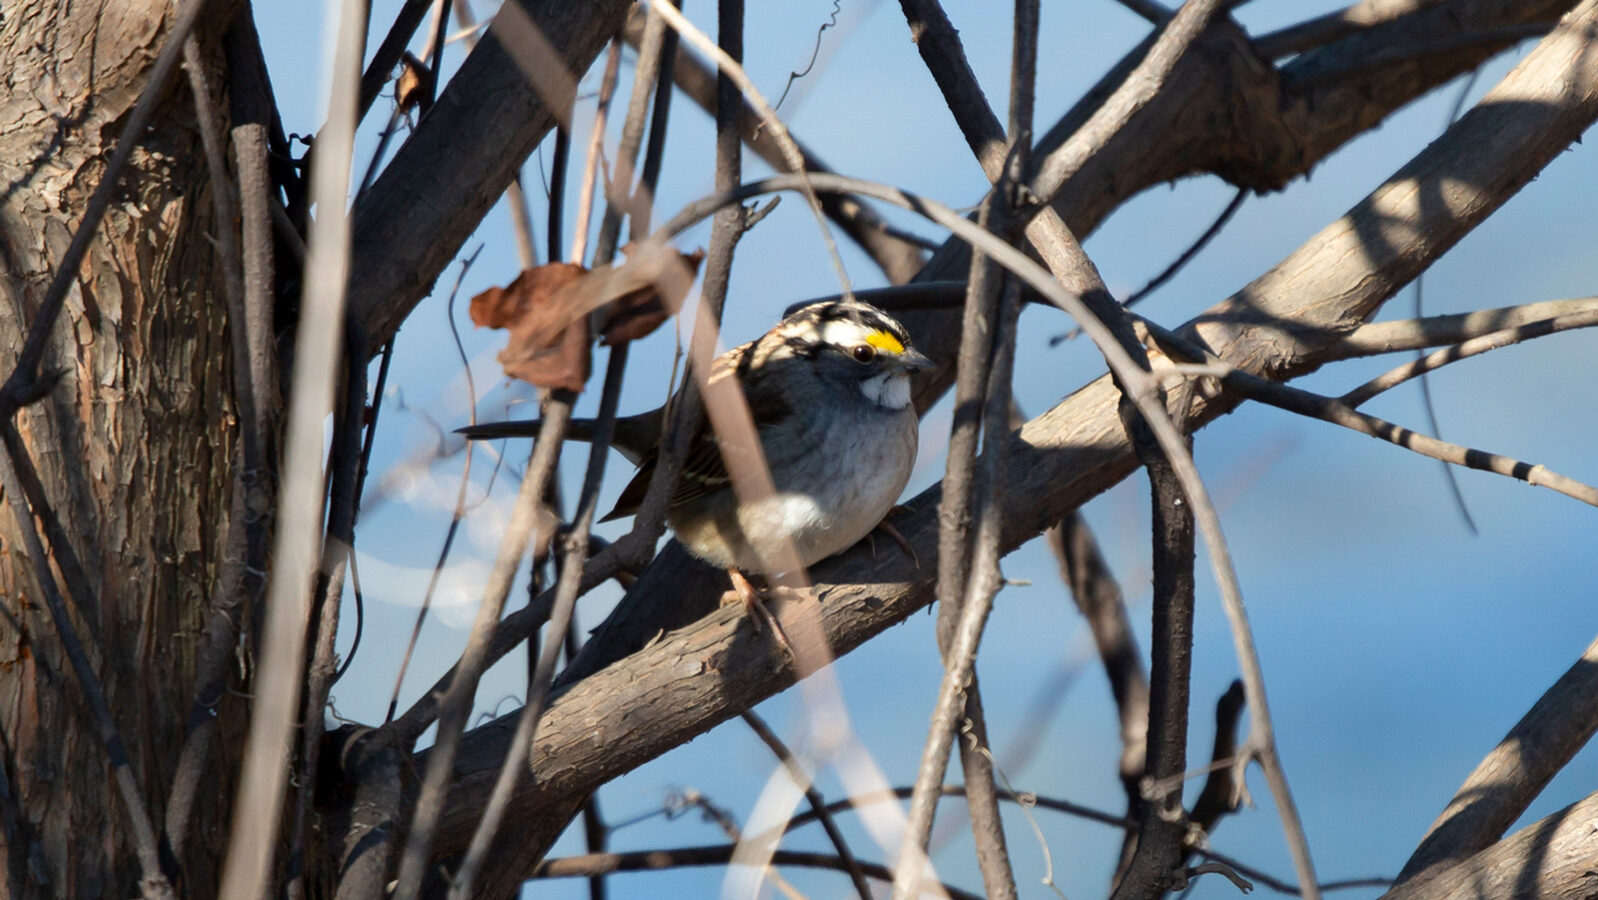 White-throated sparrow looking out from its perch on a limb